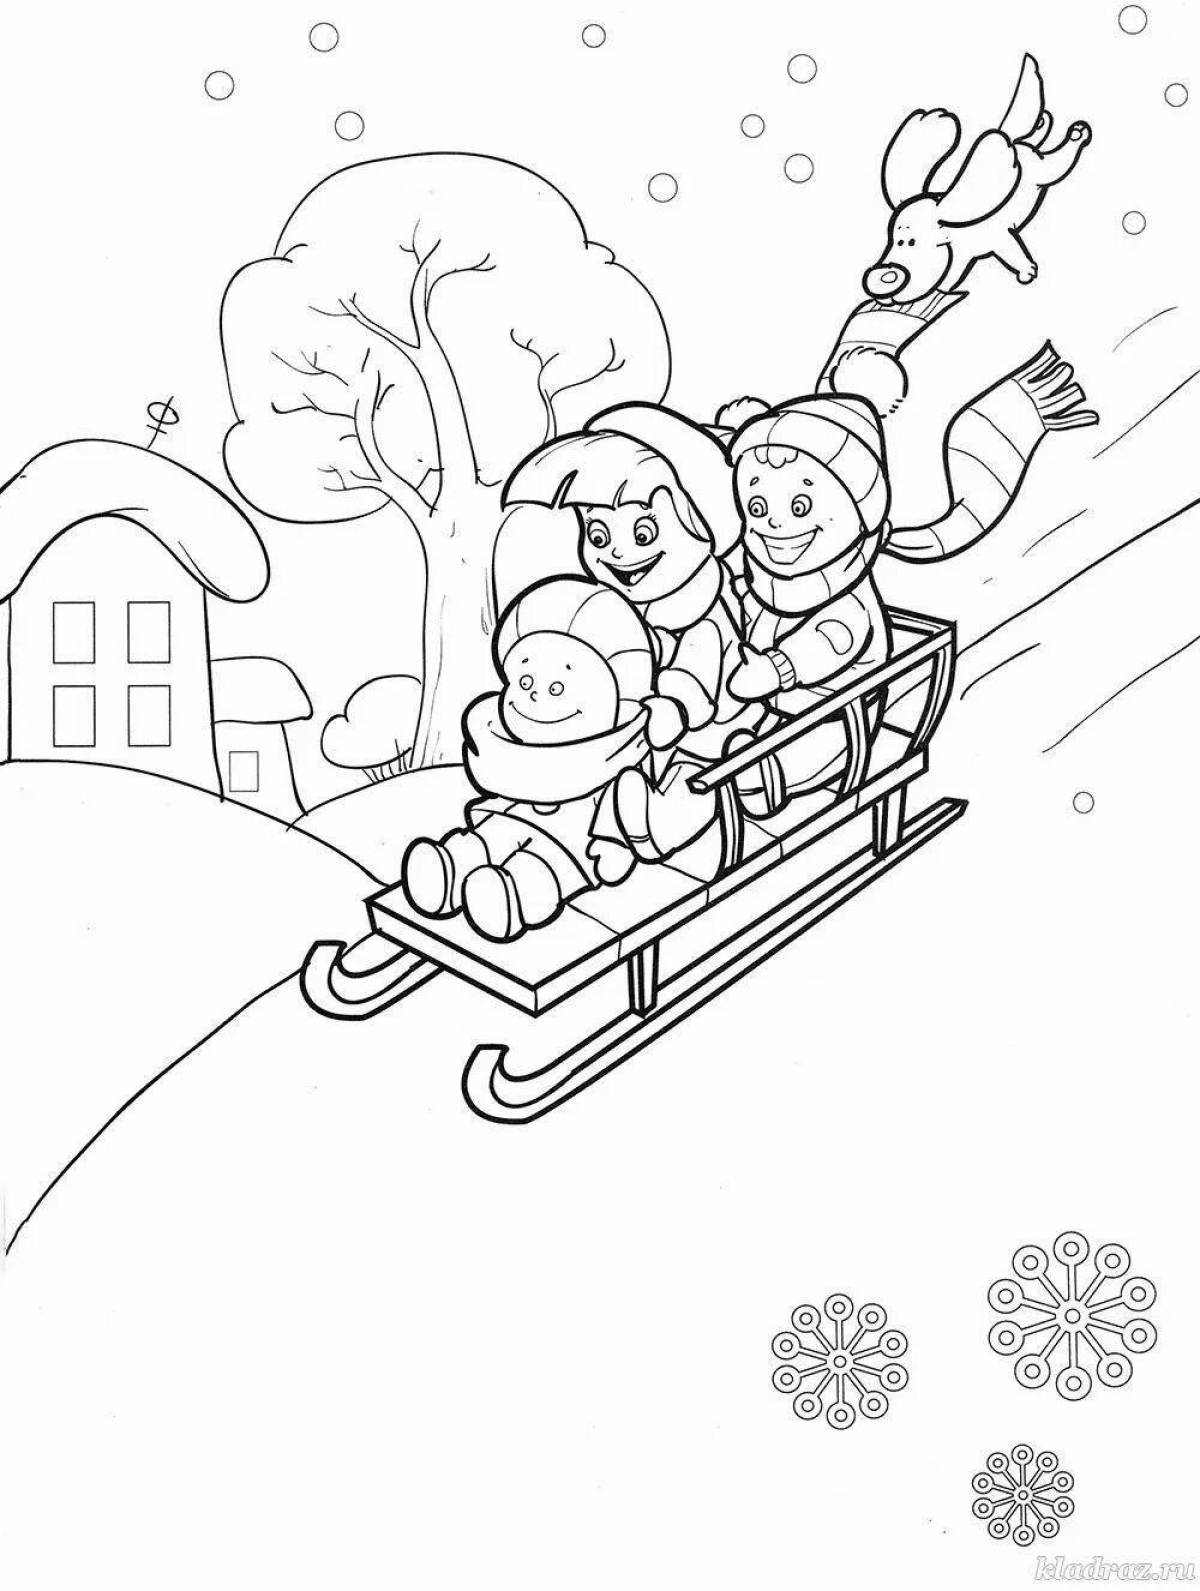 Shiny coloring pages rules of the road in winter